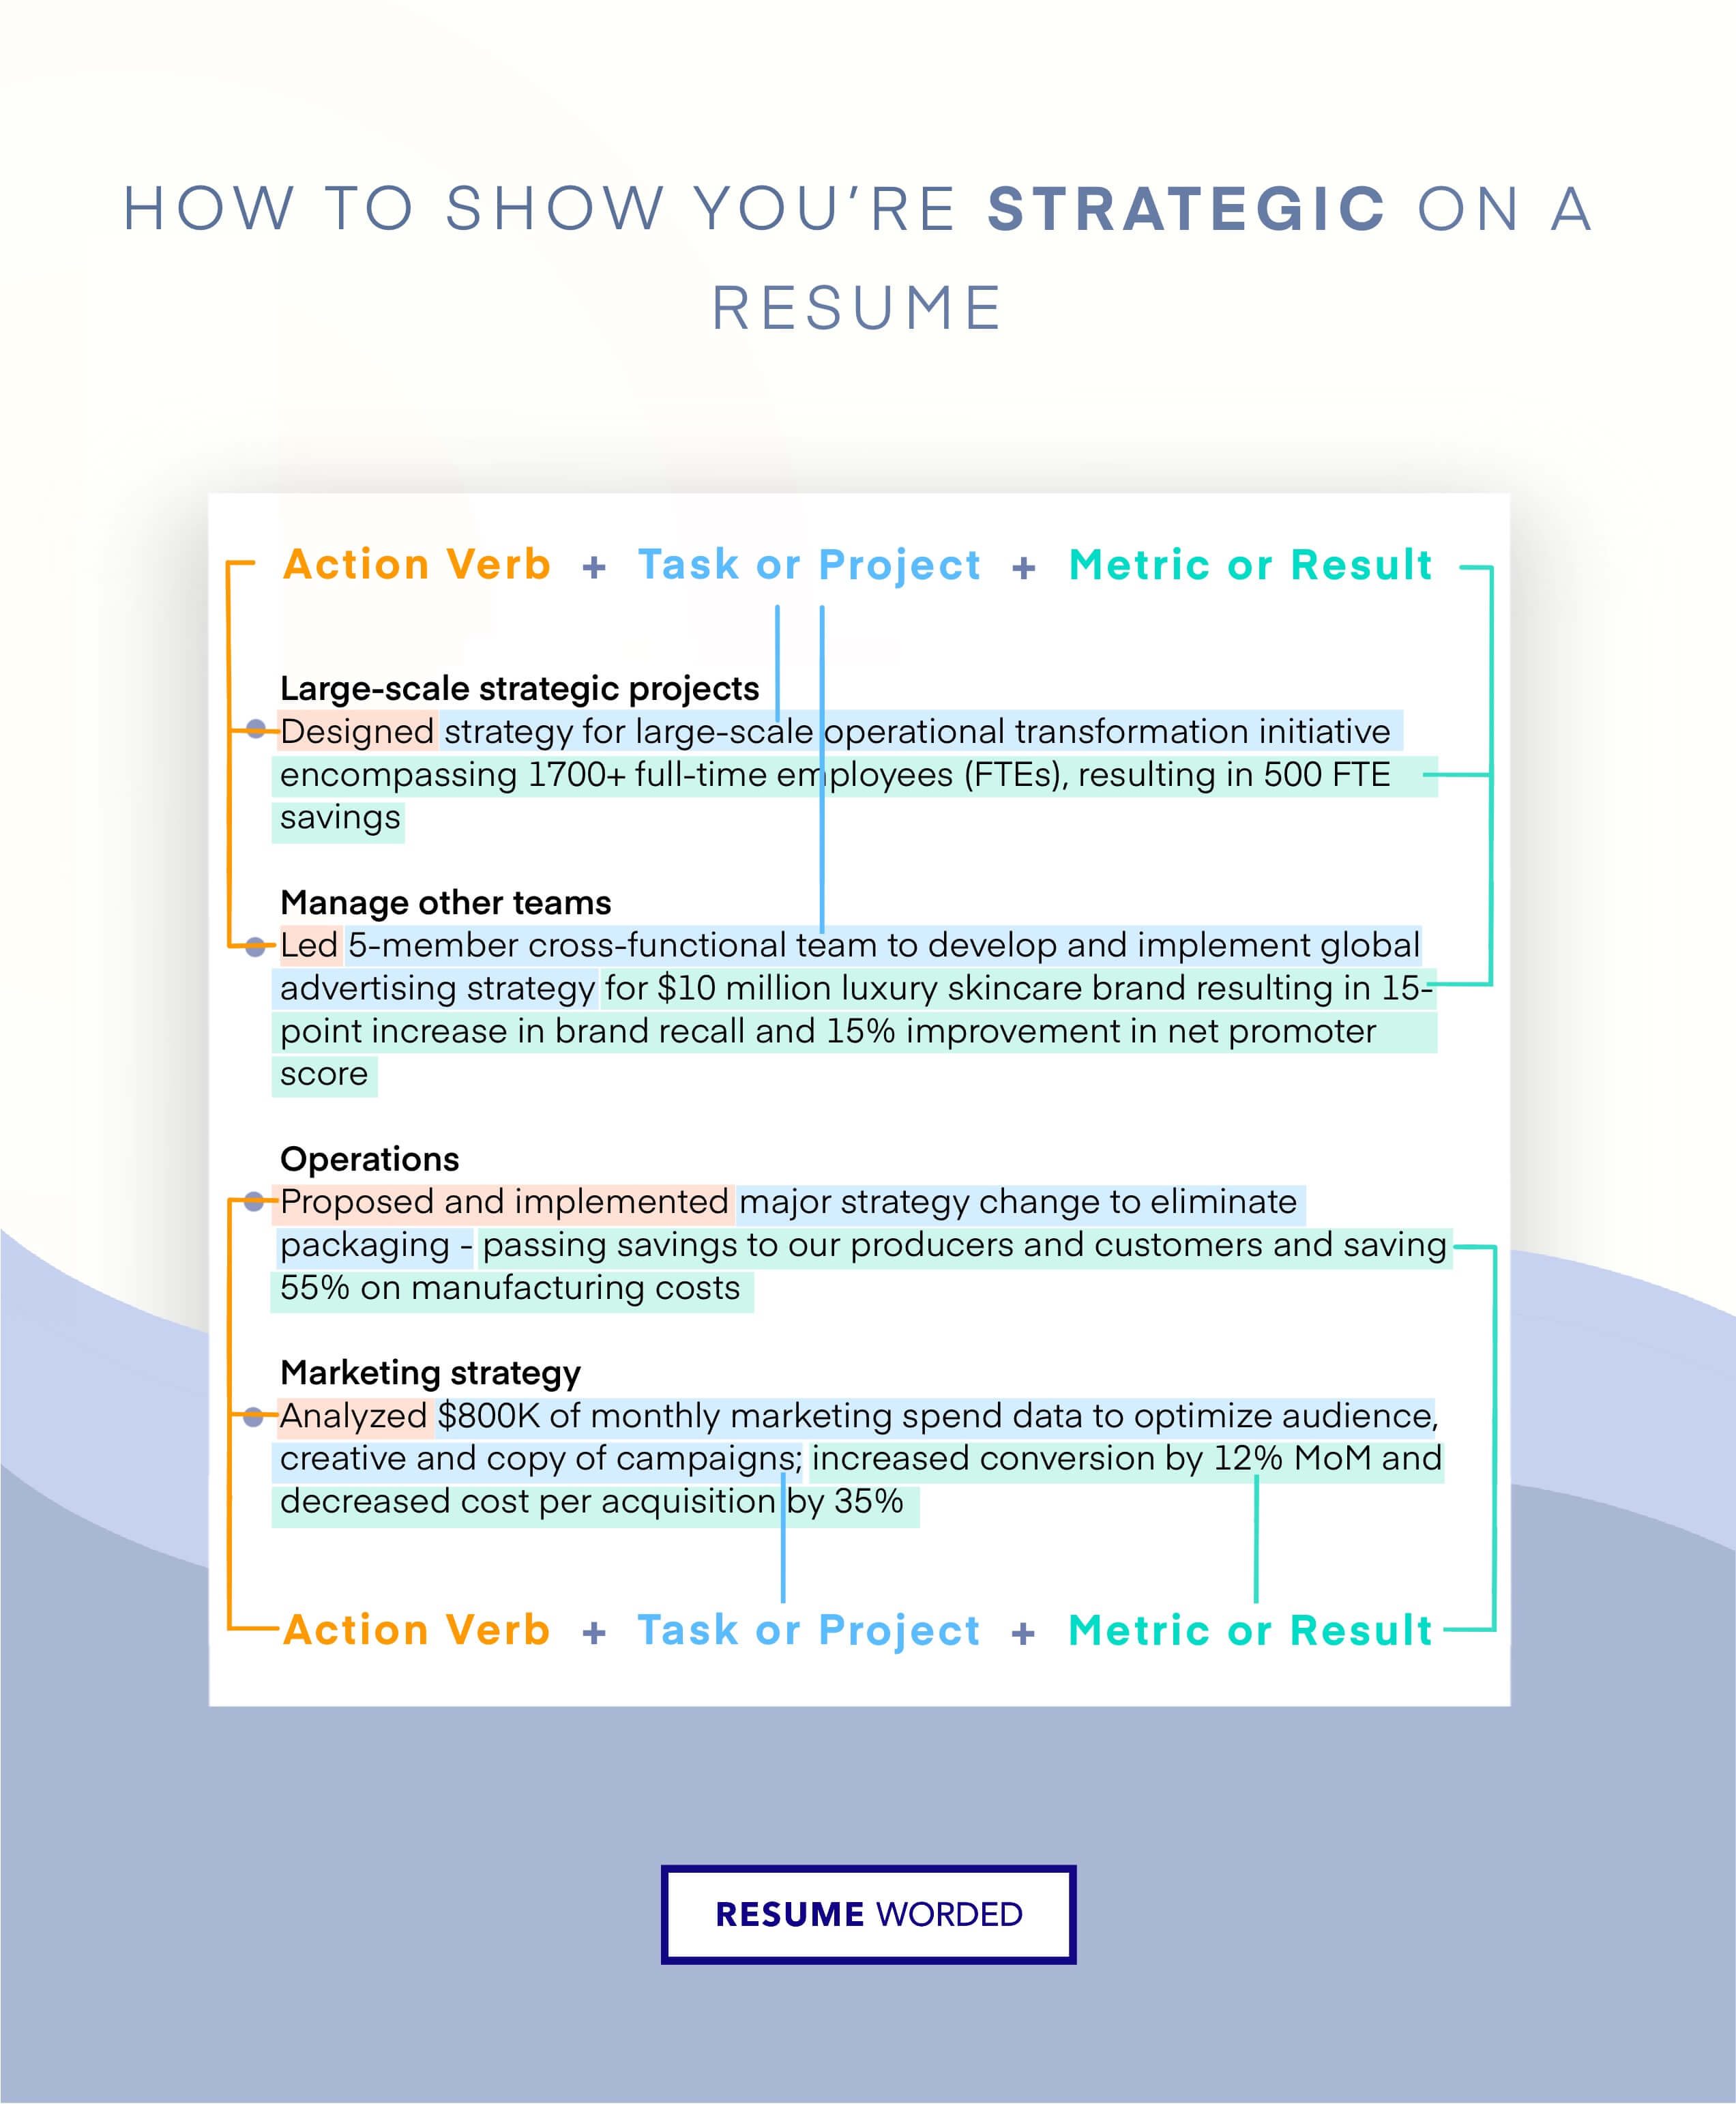 Show off your creativity and strategic thinking - Social Media Manager CV